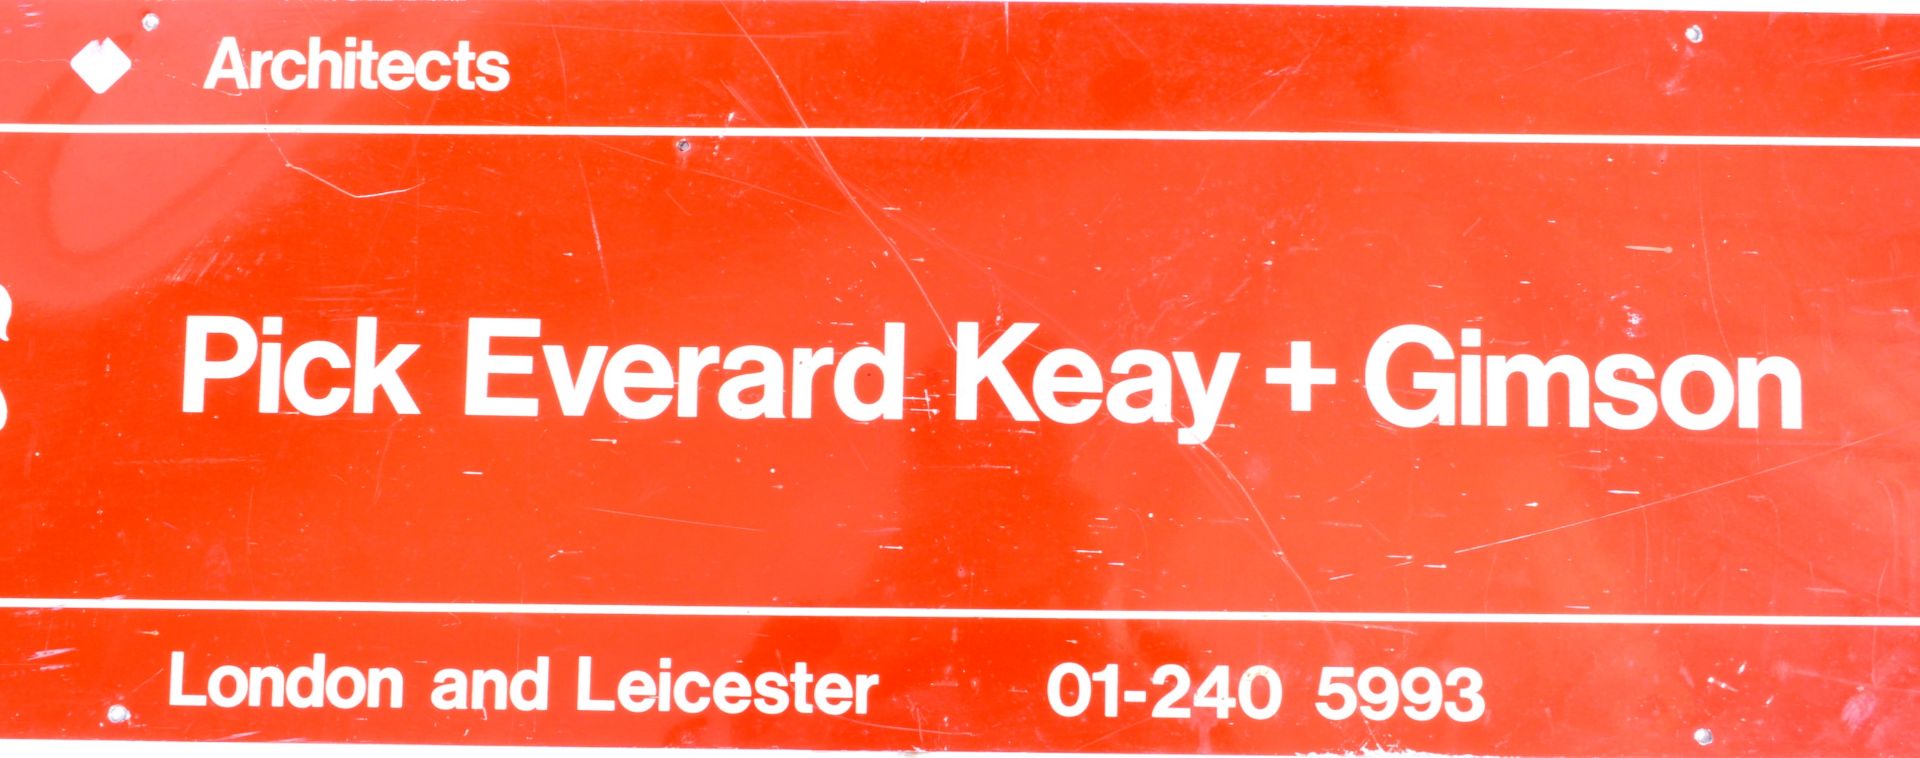 PICK EVERARD KEAY + GIMSON ARCHITECTS ADVERTISING METAL SIGN - Image 4 of 6